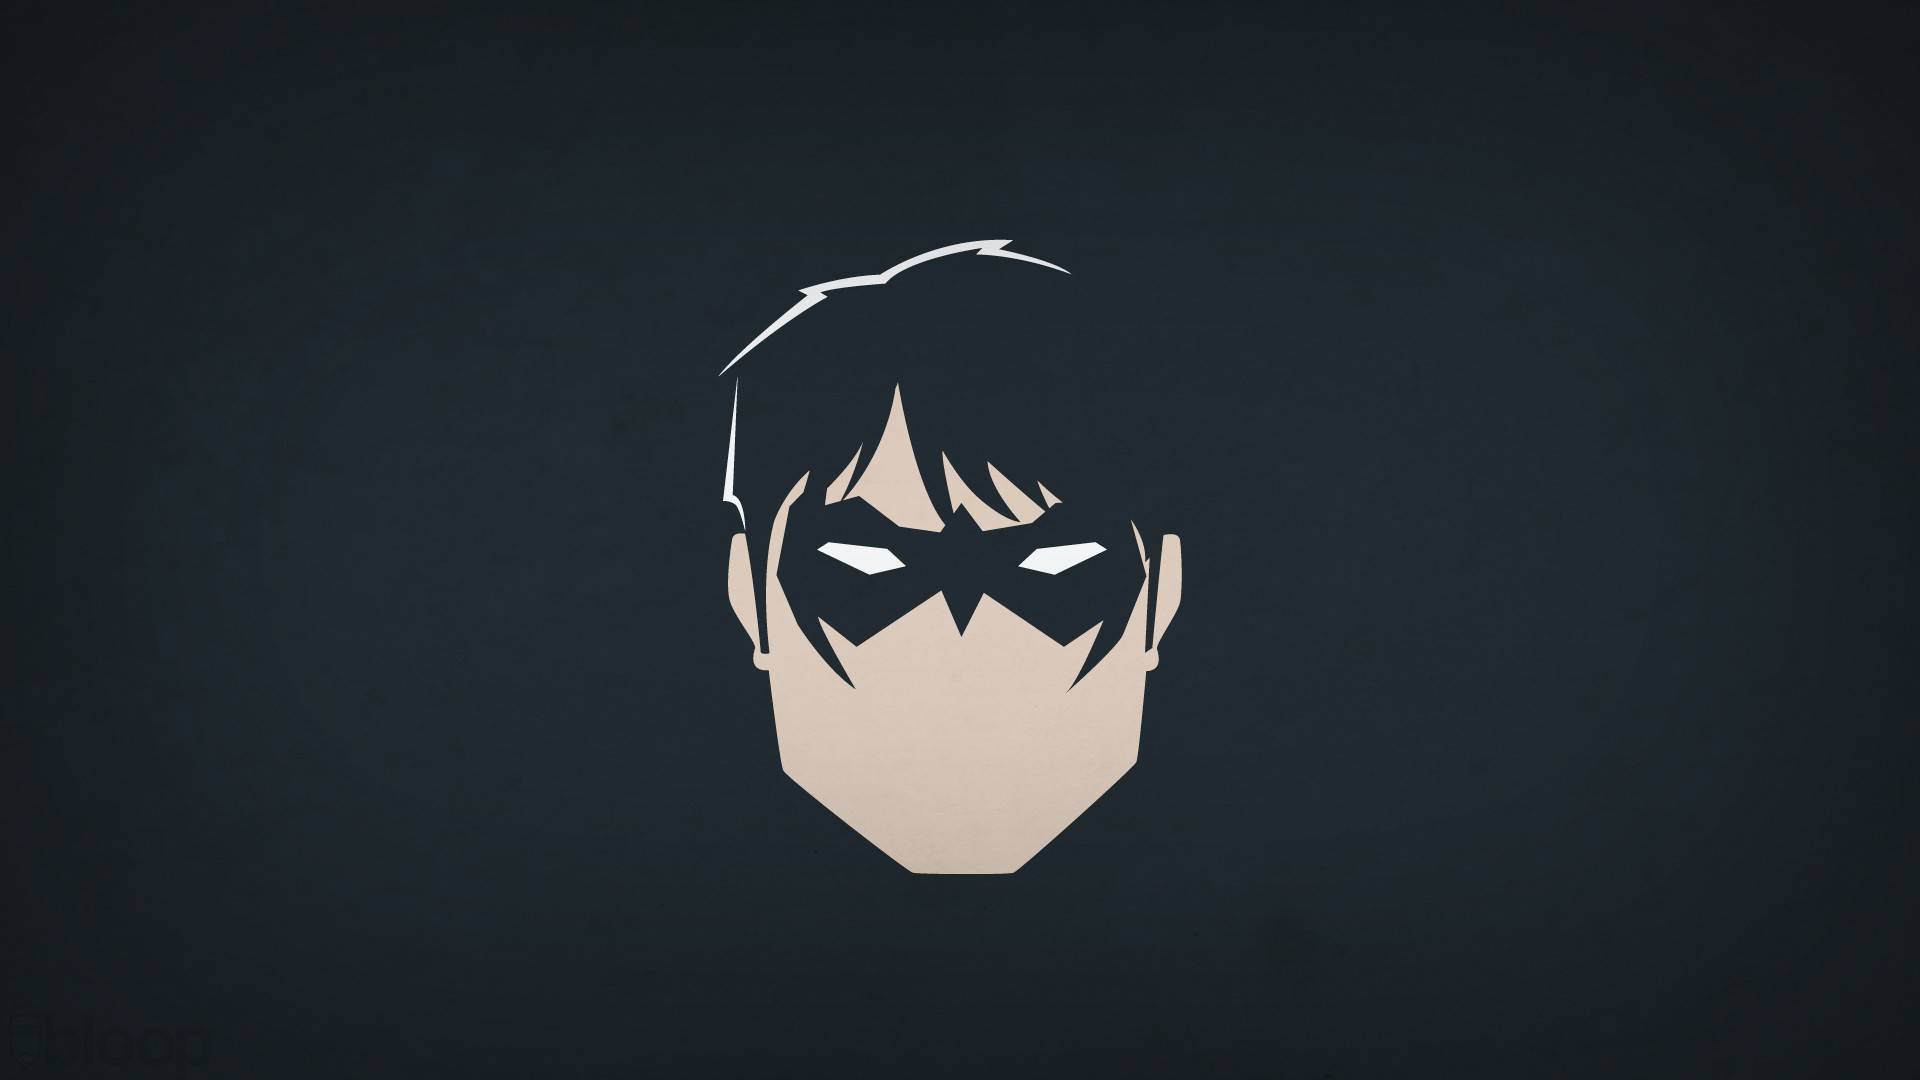 Wallpaper For > Nightwing Wallpaper 1920x1080